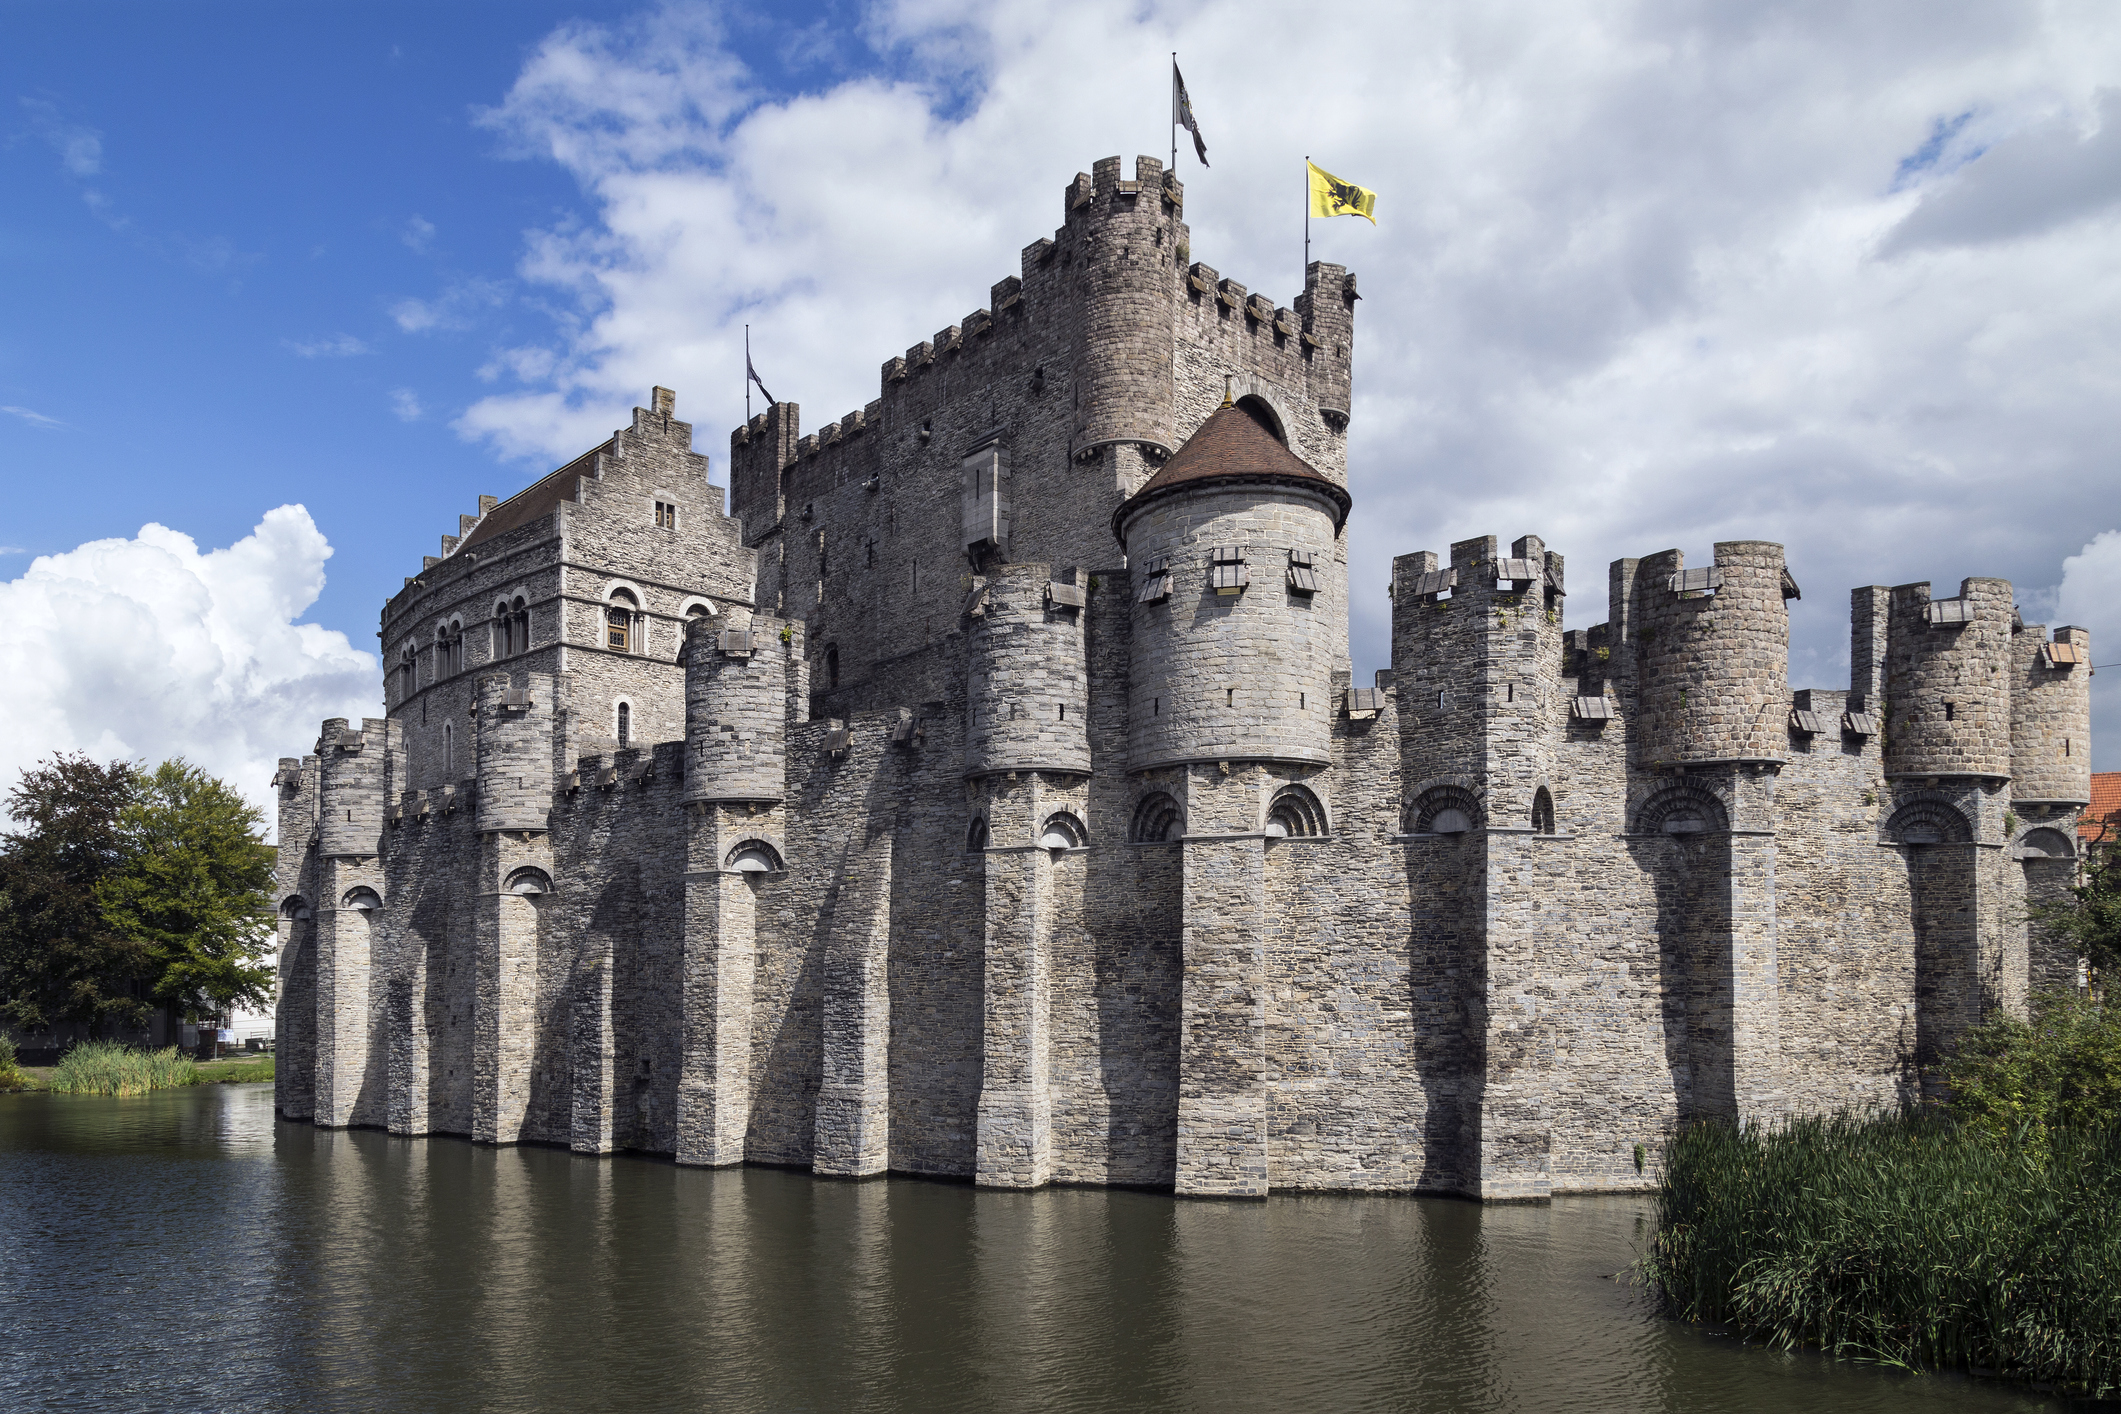 The Gravensteen - a medieval castle in the city of Ghent in Belgium. The present castle was built in 1180 by Count Philip of Alsace to replace a 9th century wooden castle.